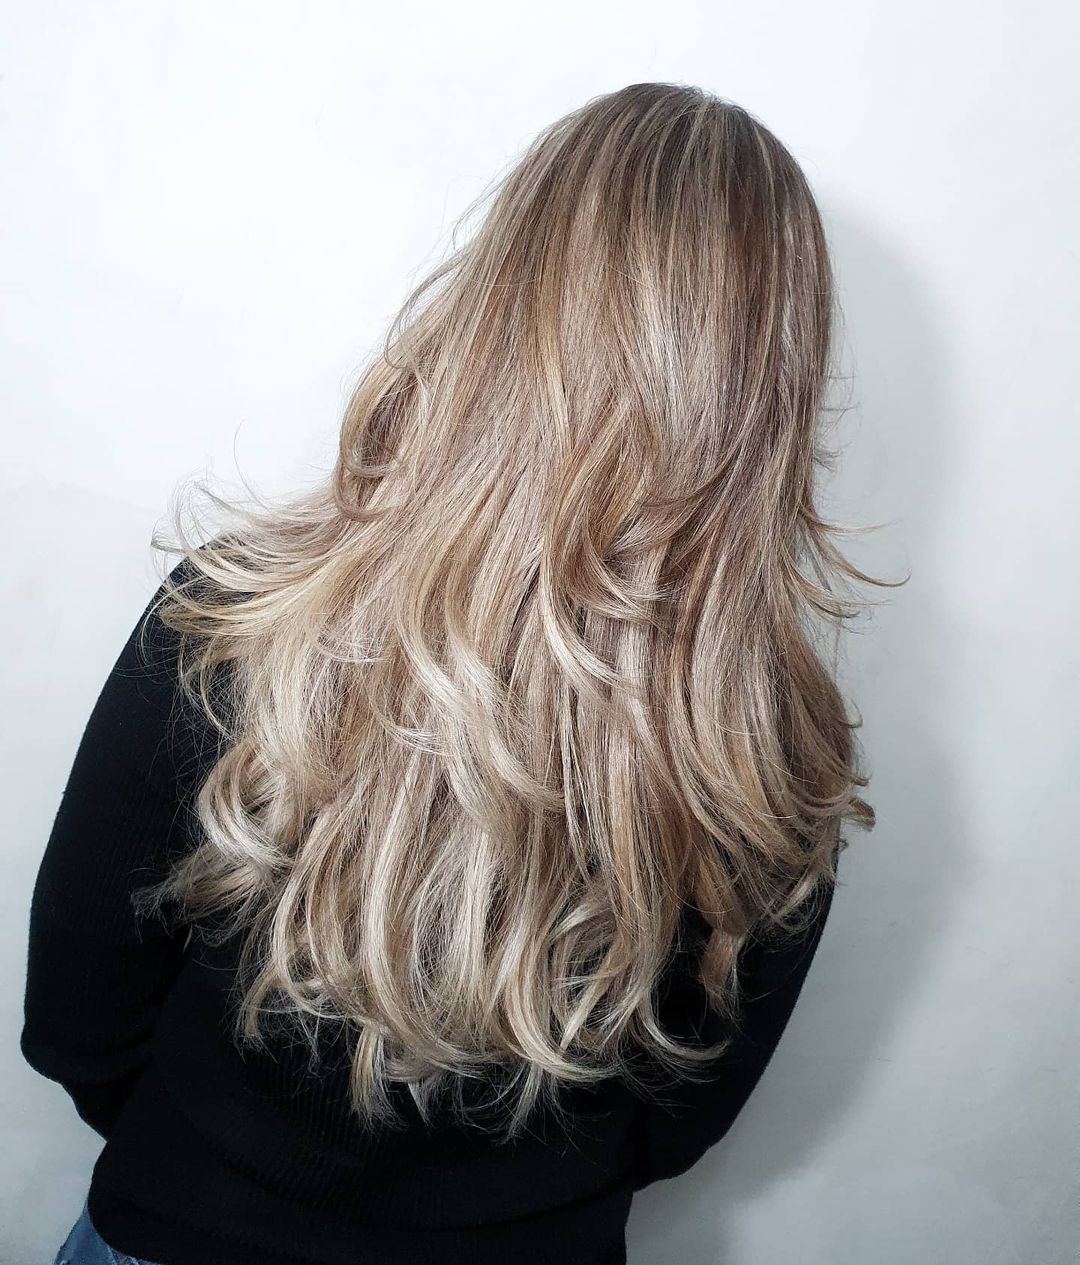 Torn haircuts for blonde hair: 16 interesting ideas for brave beauties